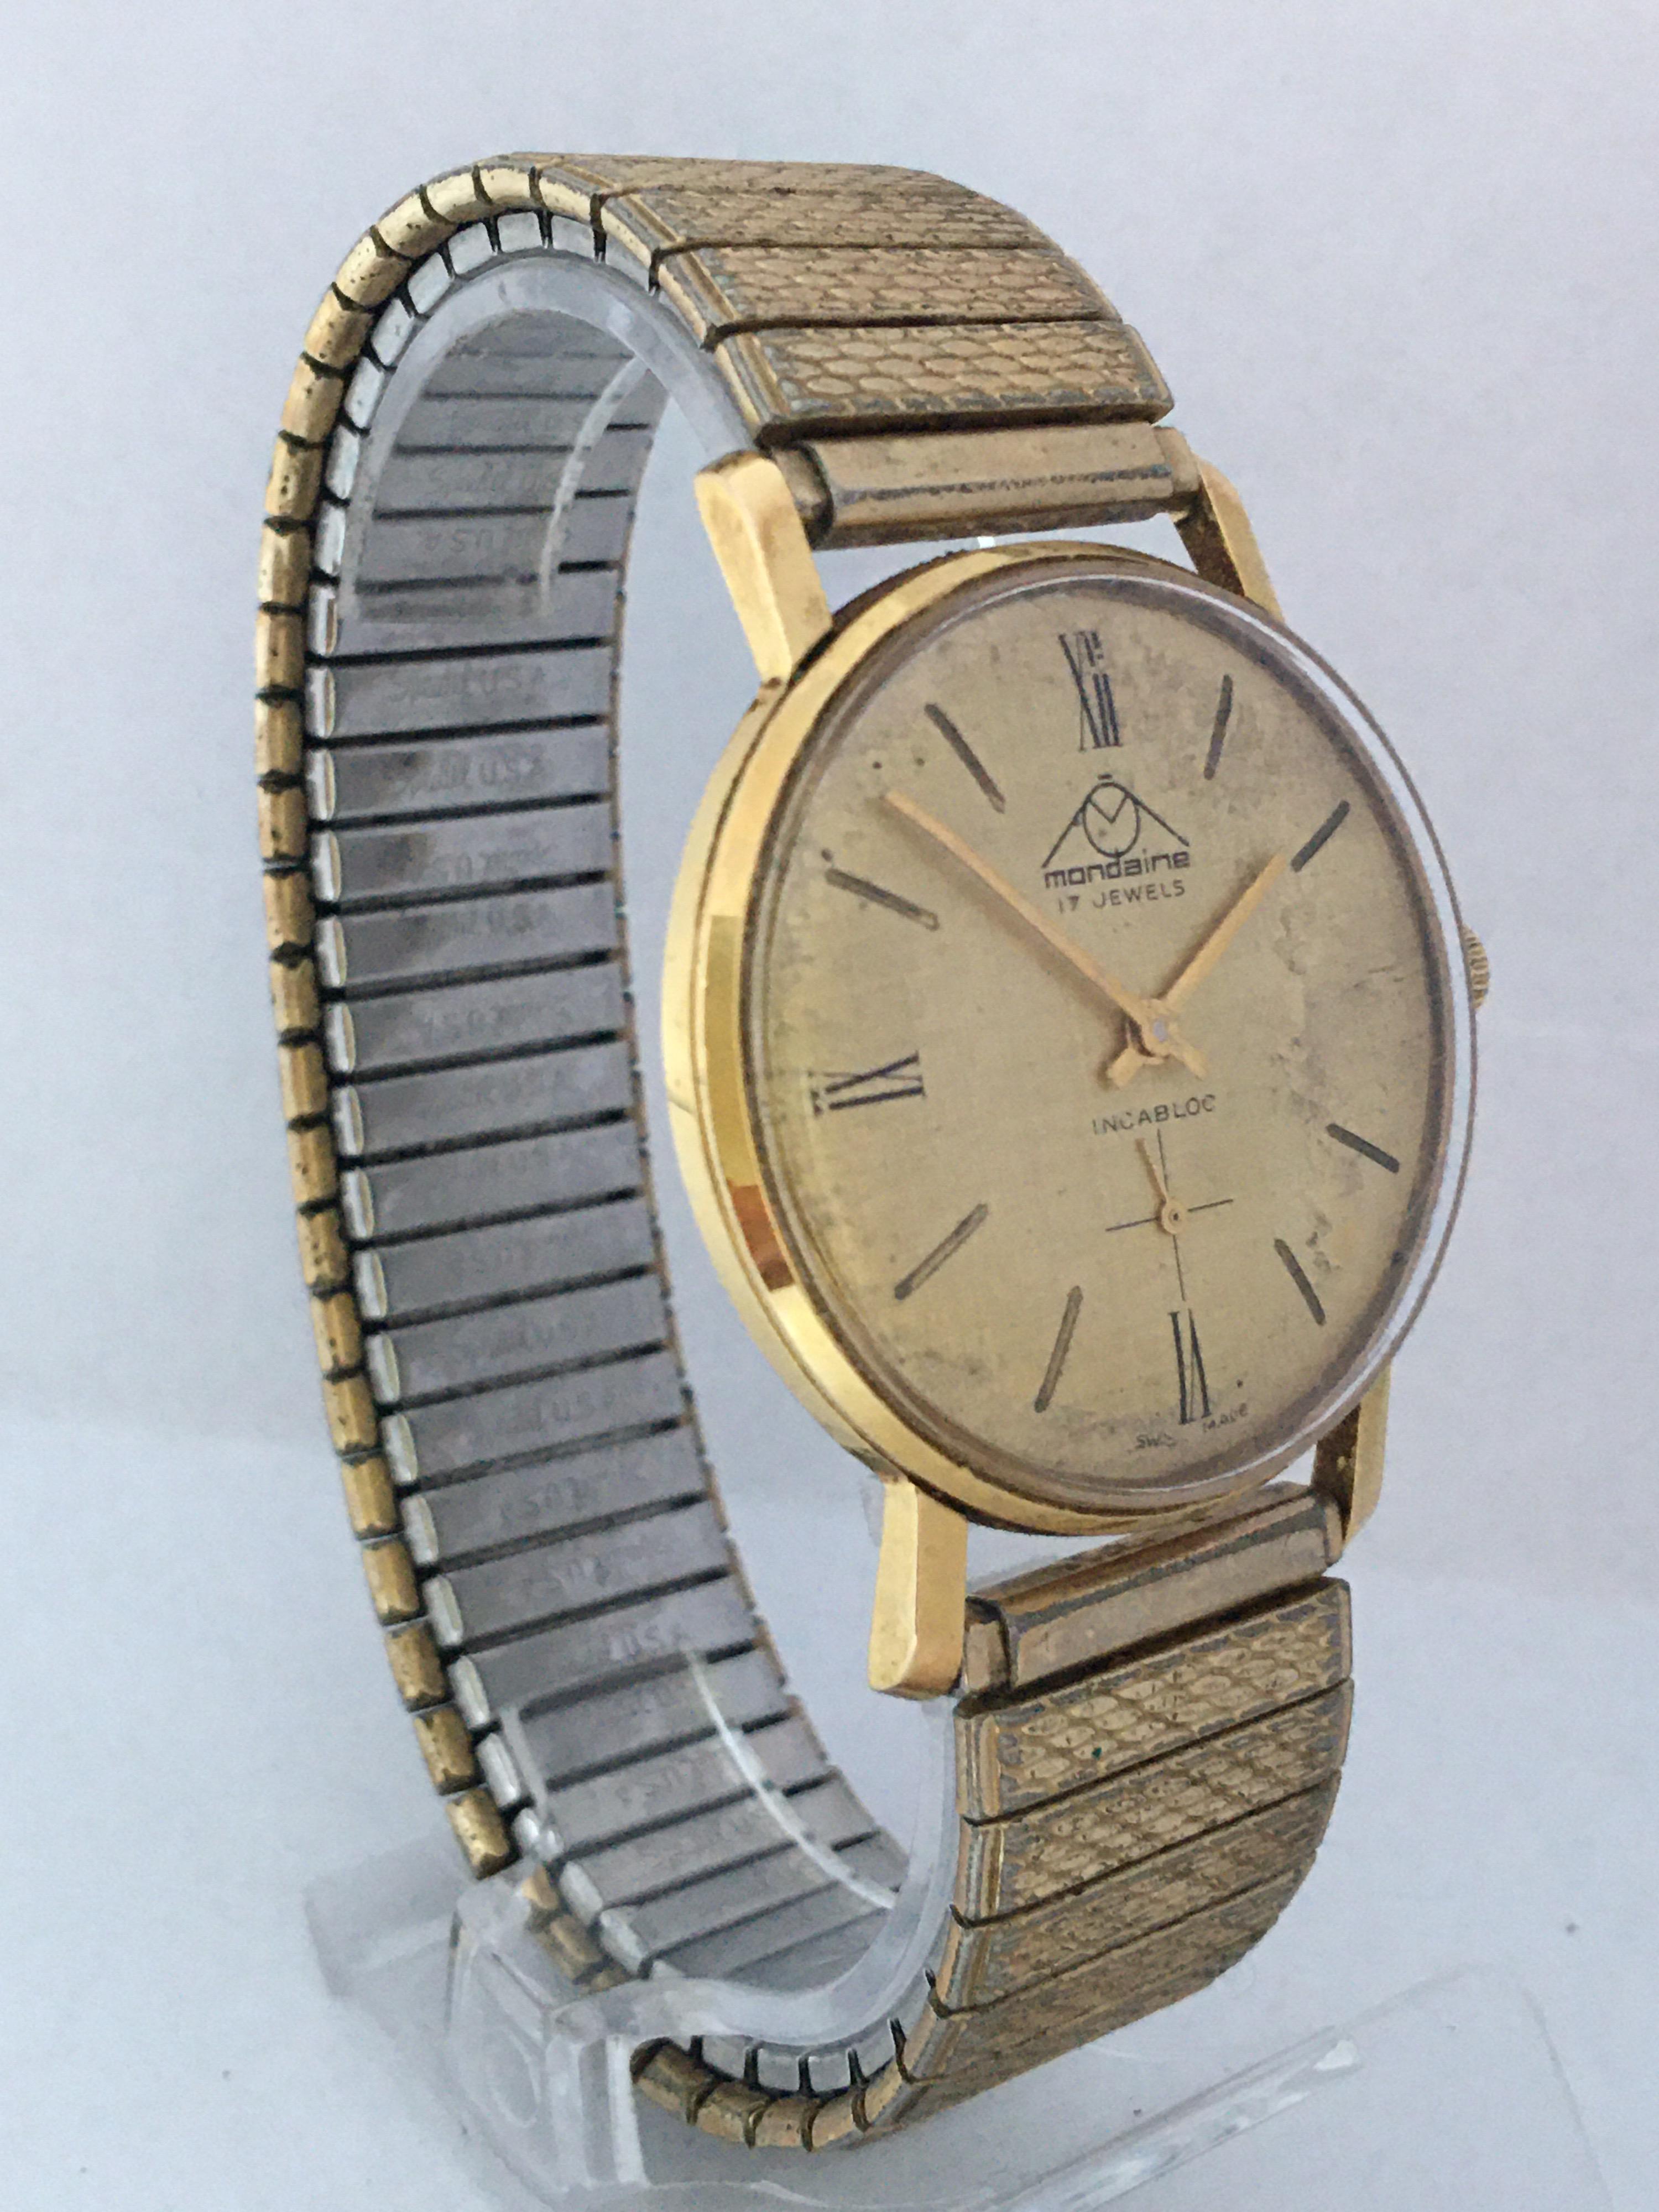 This charming pre-owned vintage hand-winding watch is working and it is running well. some deterioration on the gold plate dial as shown. Its 6.5 inches gold plated watch and stainless steel back has aged and tarnished as shown. 

Please study the